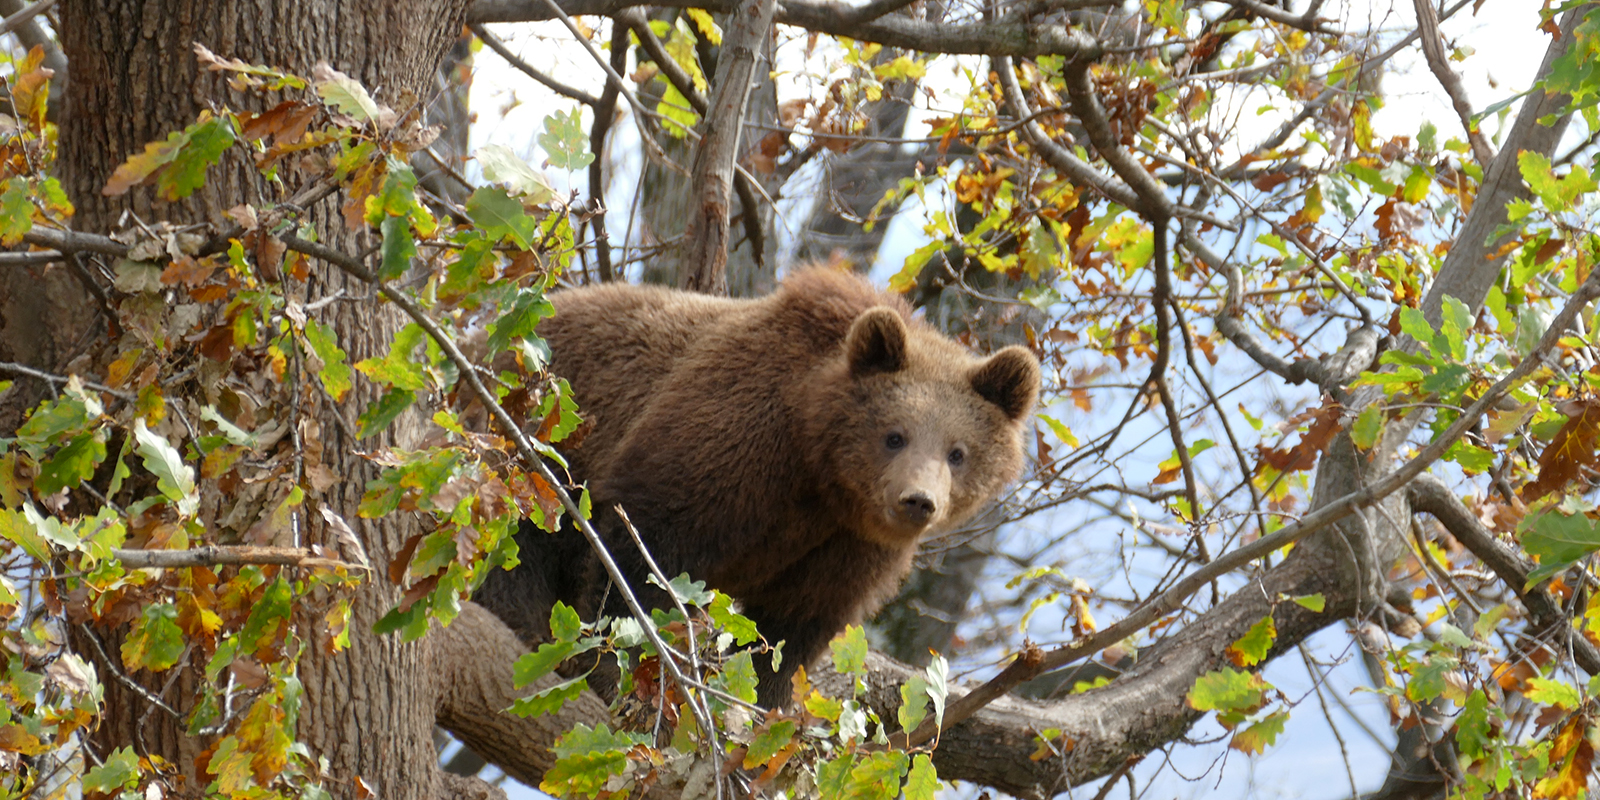 Bear sanctuary in Romania: sufficient space and possibilities of withdrawal for rescued brown bears